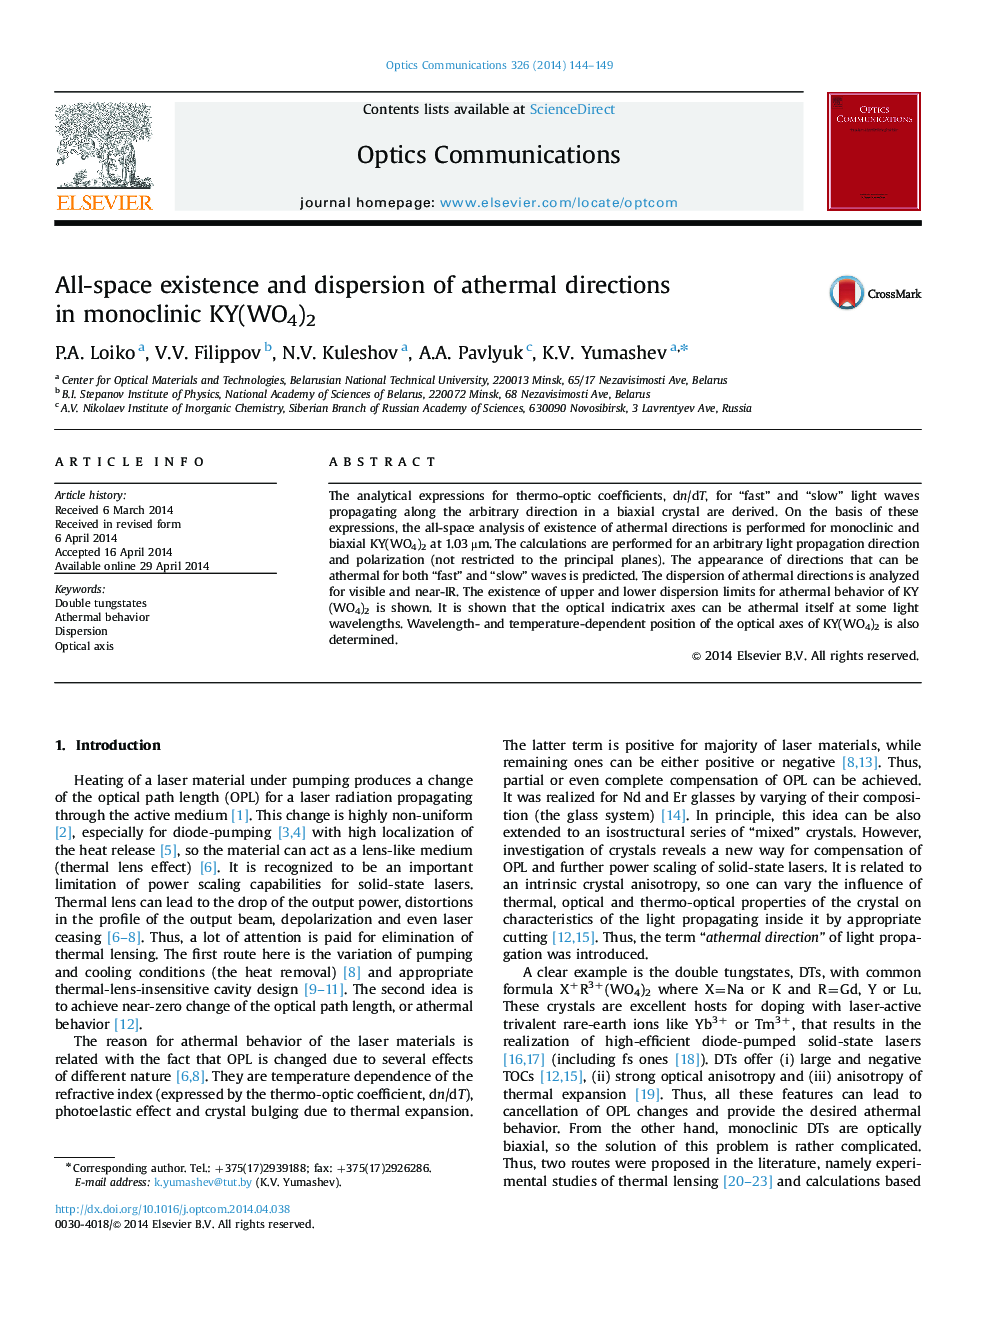 All-space existence and dispersion of athermal directions in monoclinic KY(WO4)2